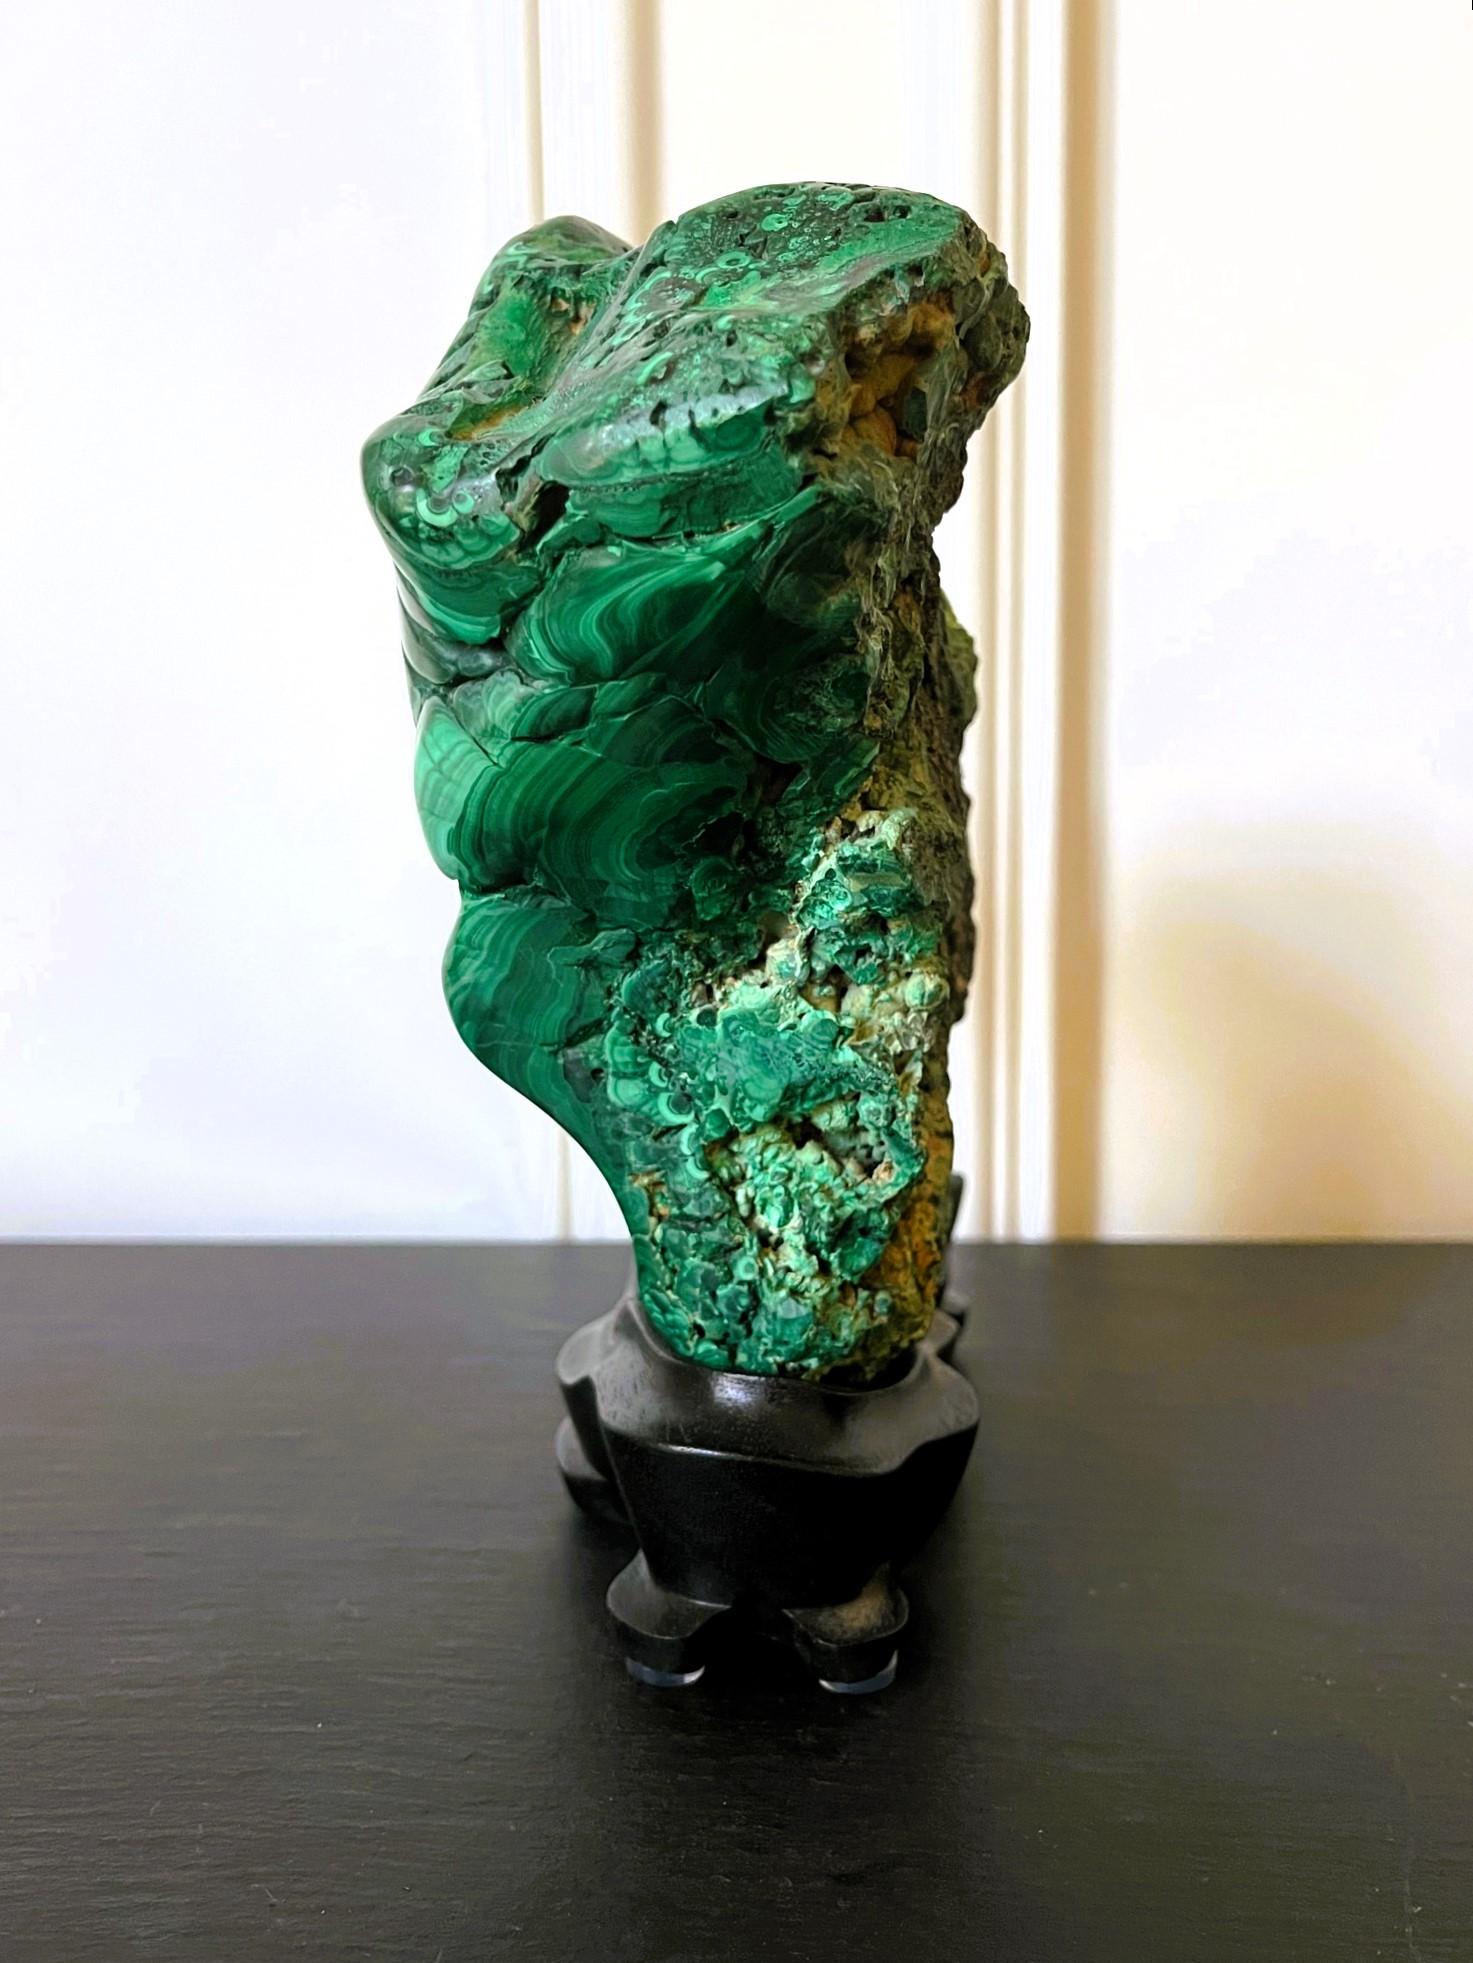 American Natural Malachite Rock on Display Stand as Chinese Scholar Stone